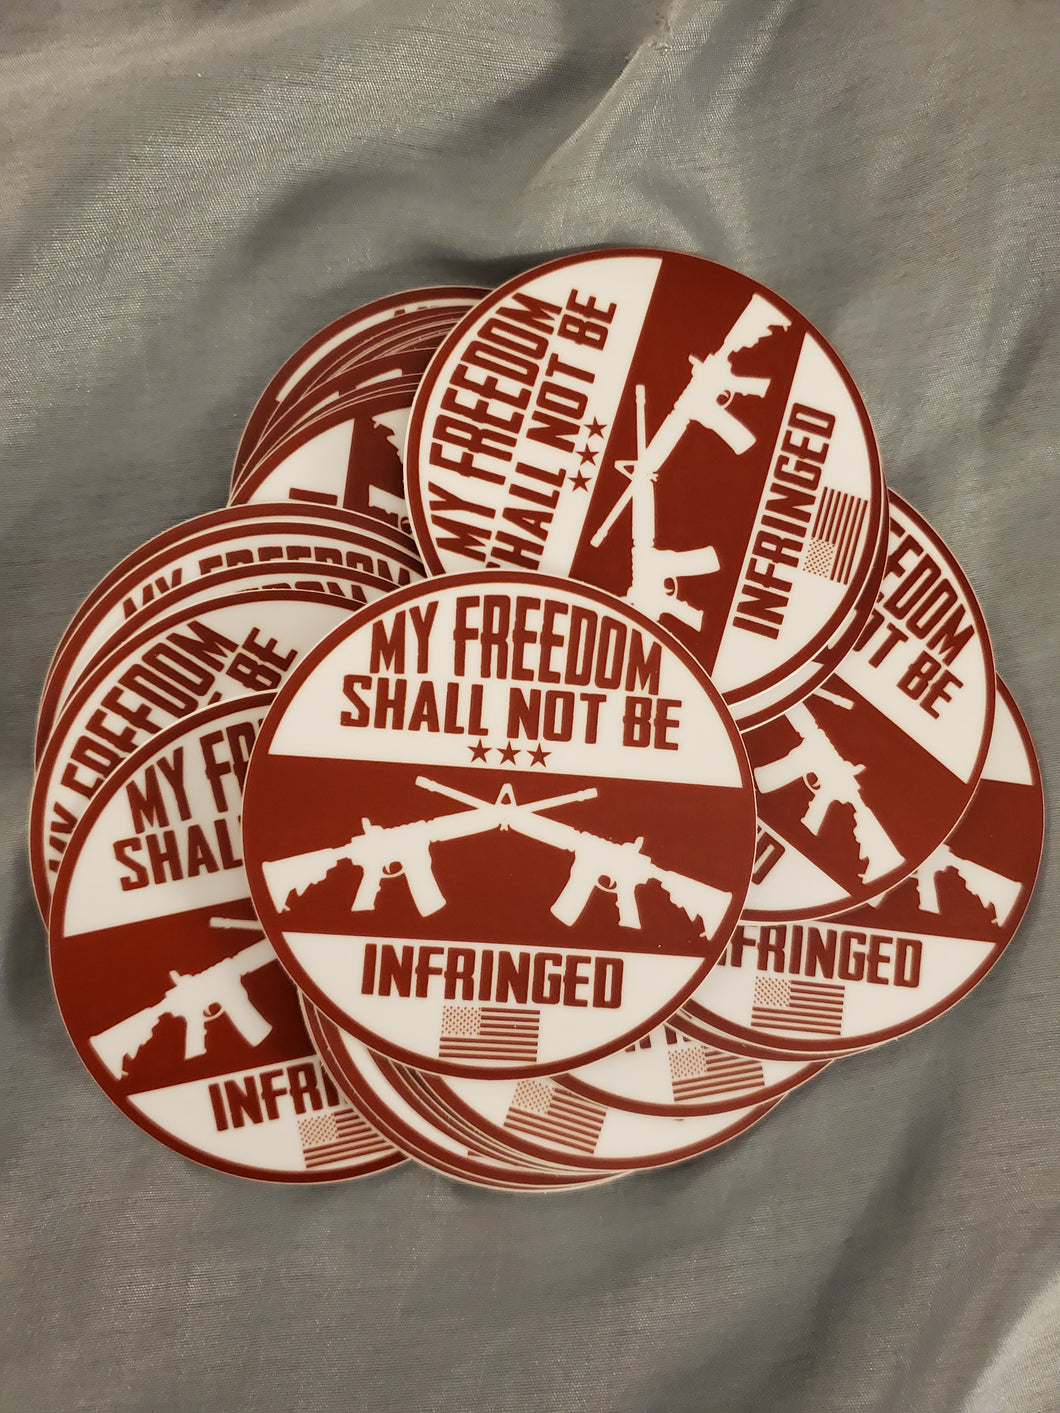 My Freedom Shall Not Be Infringed Round Stickers